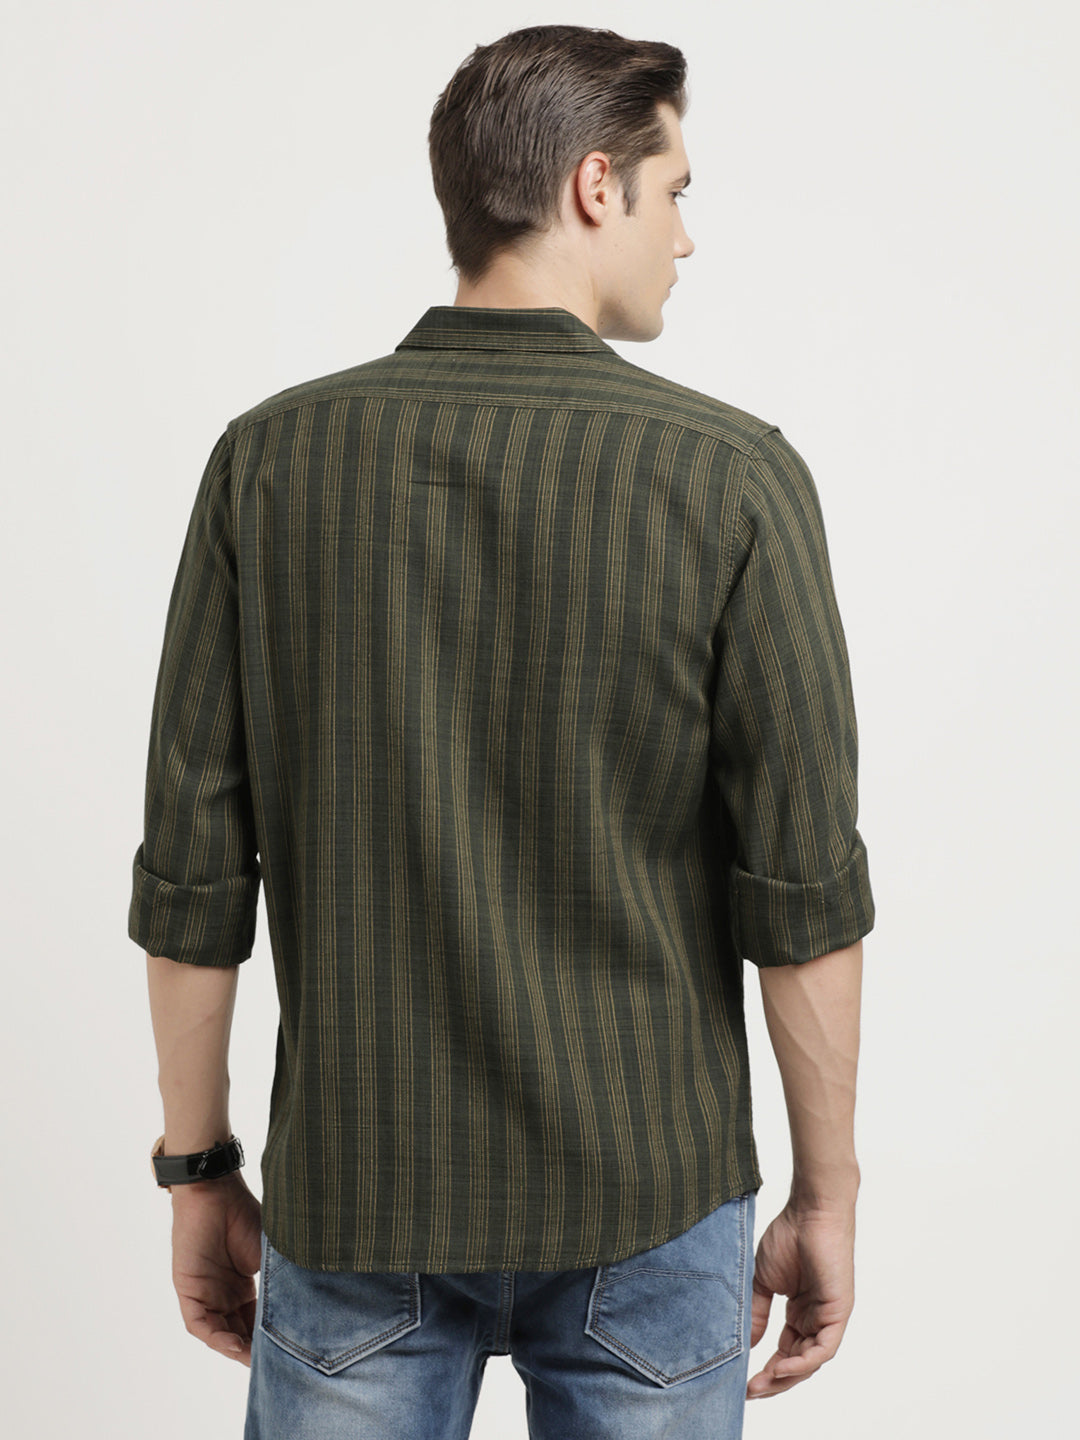 100% Cotton Green Striped Slim Fit Full Sleeve Casual Shirt